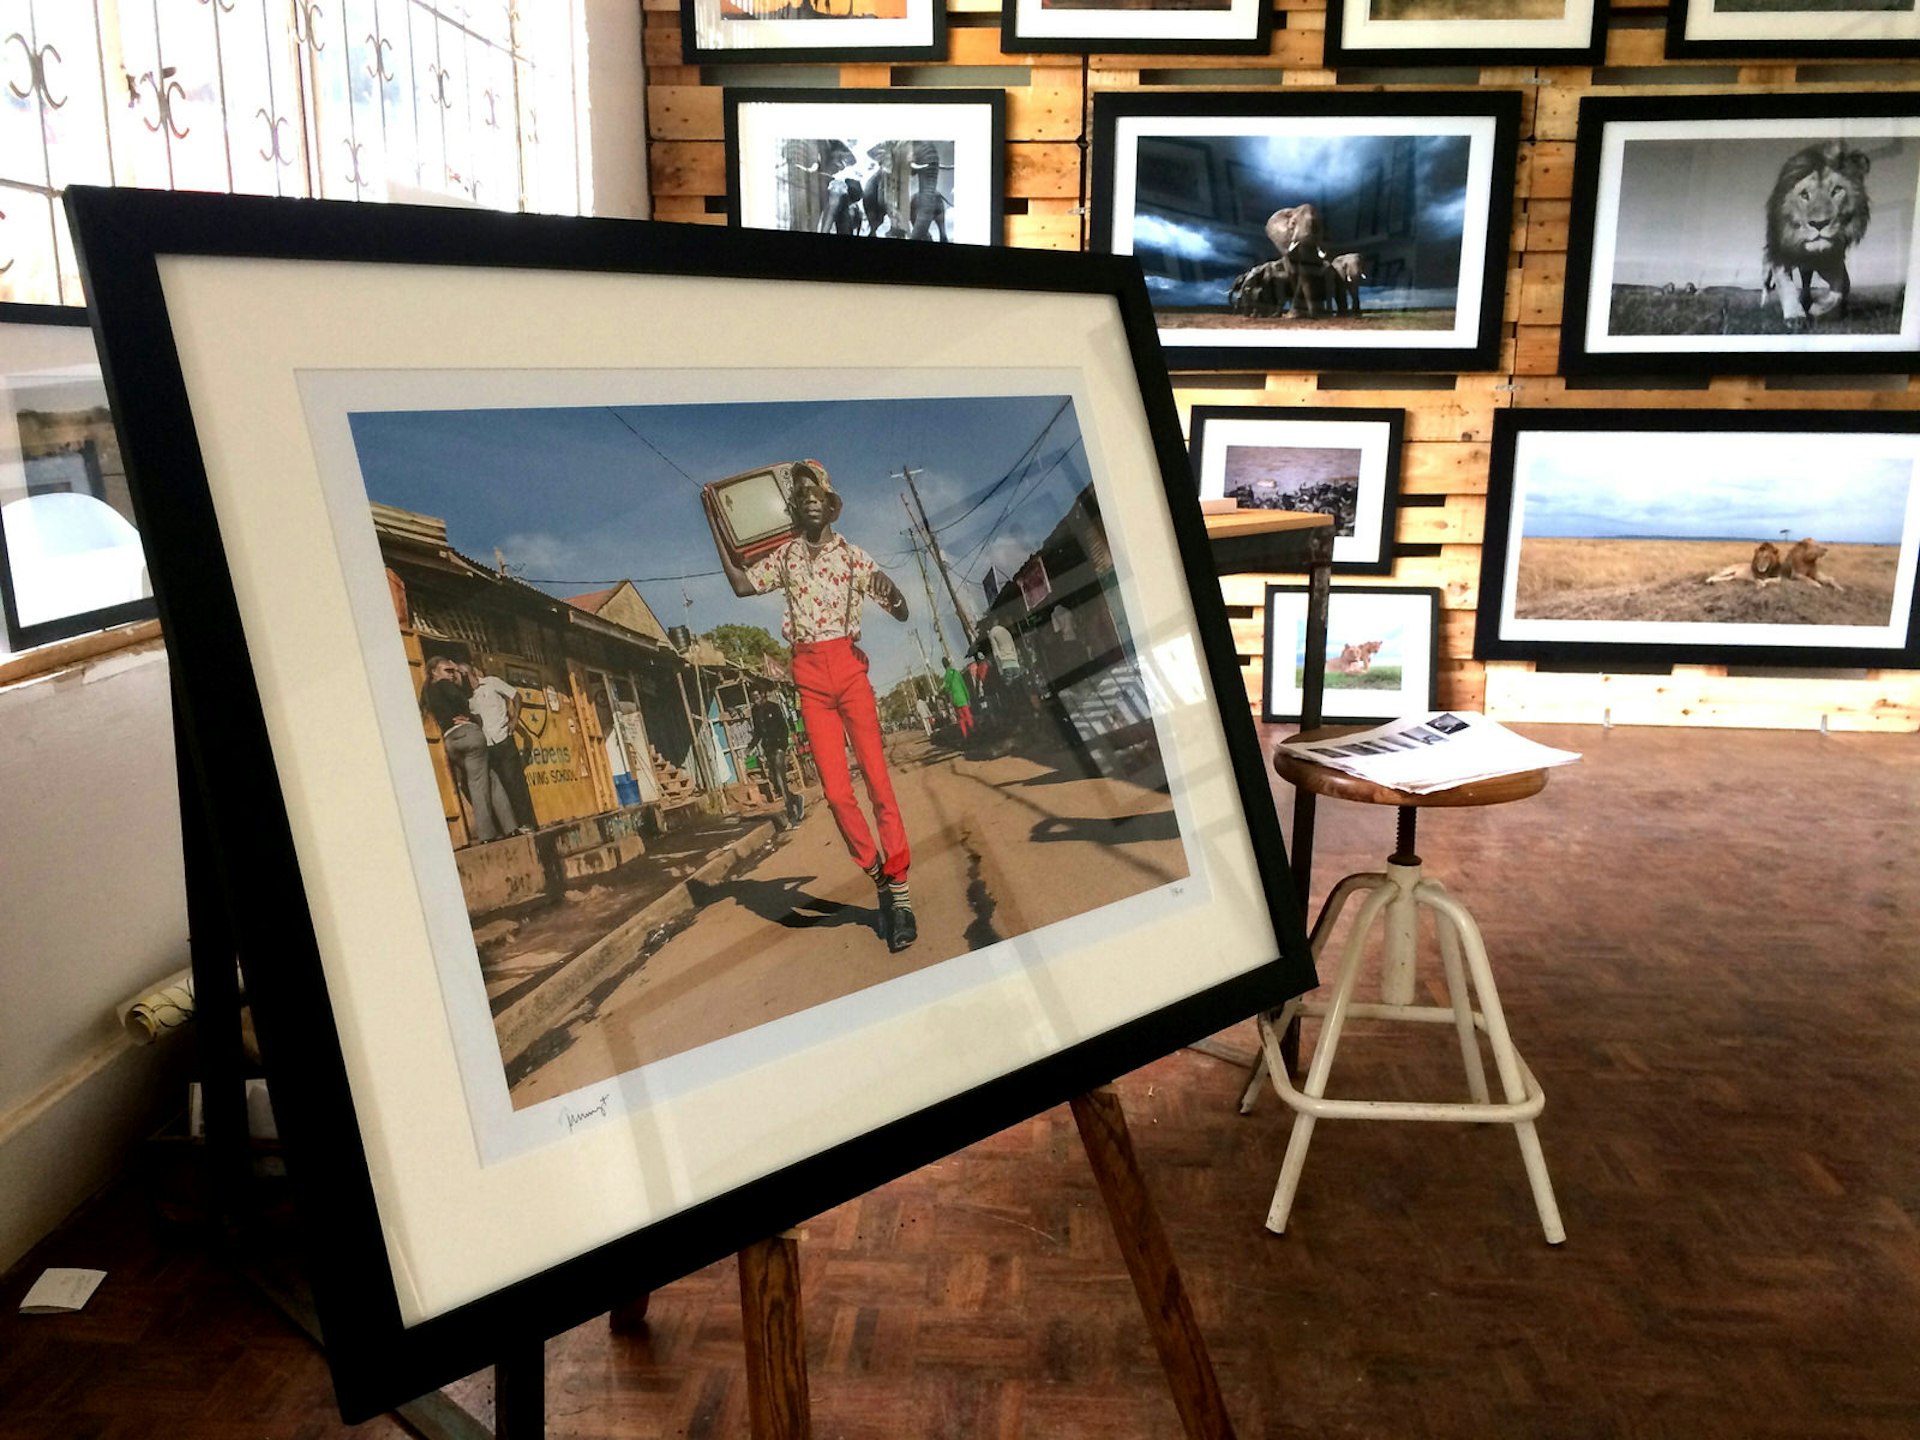 In the foreground is a large framed picture standing on an easel. In the picture stands a hip Kenyan man dressed in bright red trousers, flowered shirt, suspenders, sunglasses and sun hat. On his shoulders sits on old fashioned television. It looks to have been taken on the street in Kibera, Naiobi's largest slum. Behind this fram is a wall covered in framed photographs of Kenyan wildlife. The gallery is great for Nairobi shopping © Clementine Logan / Lonely Planet